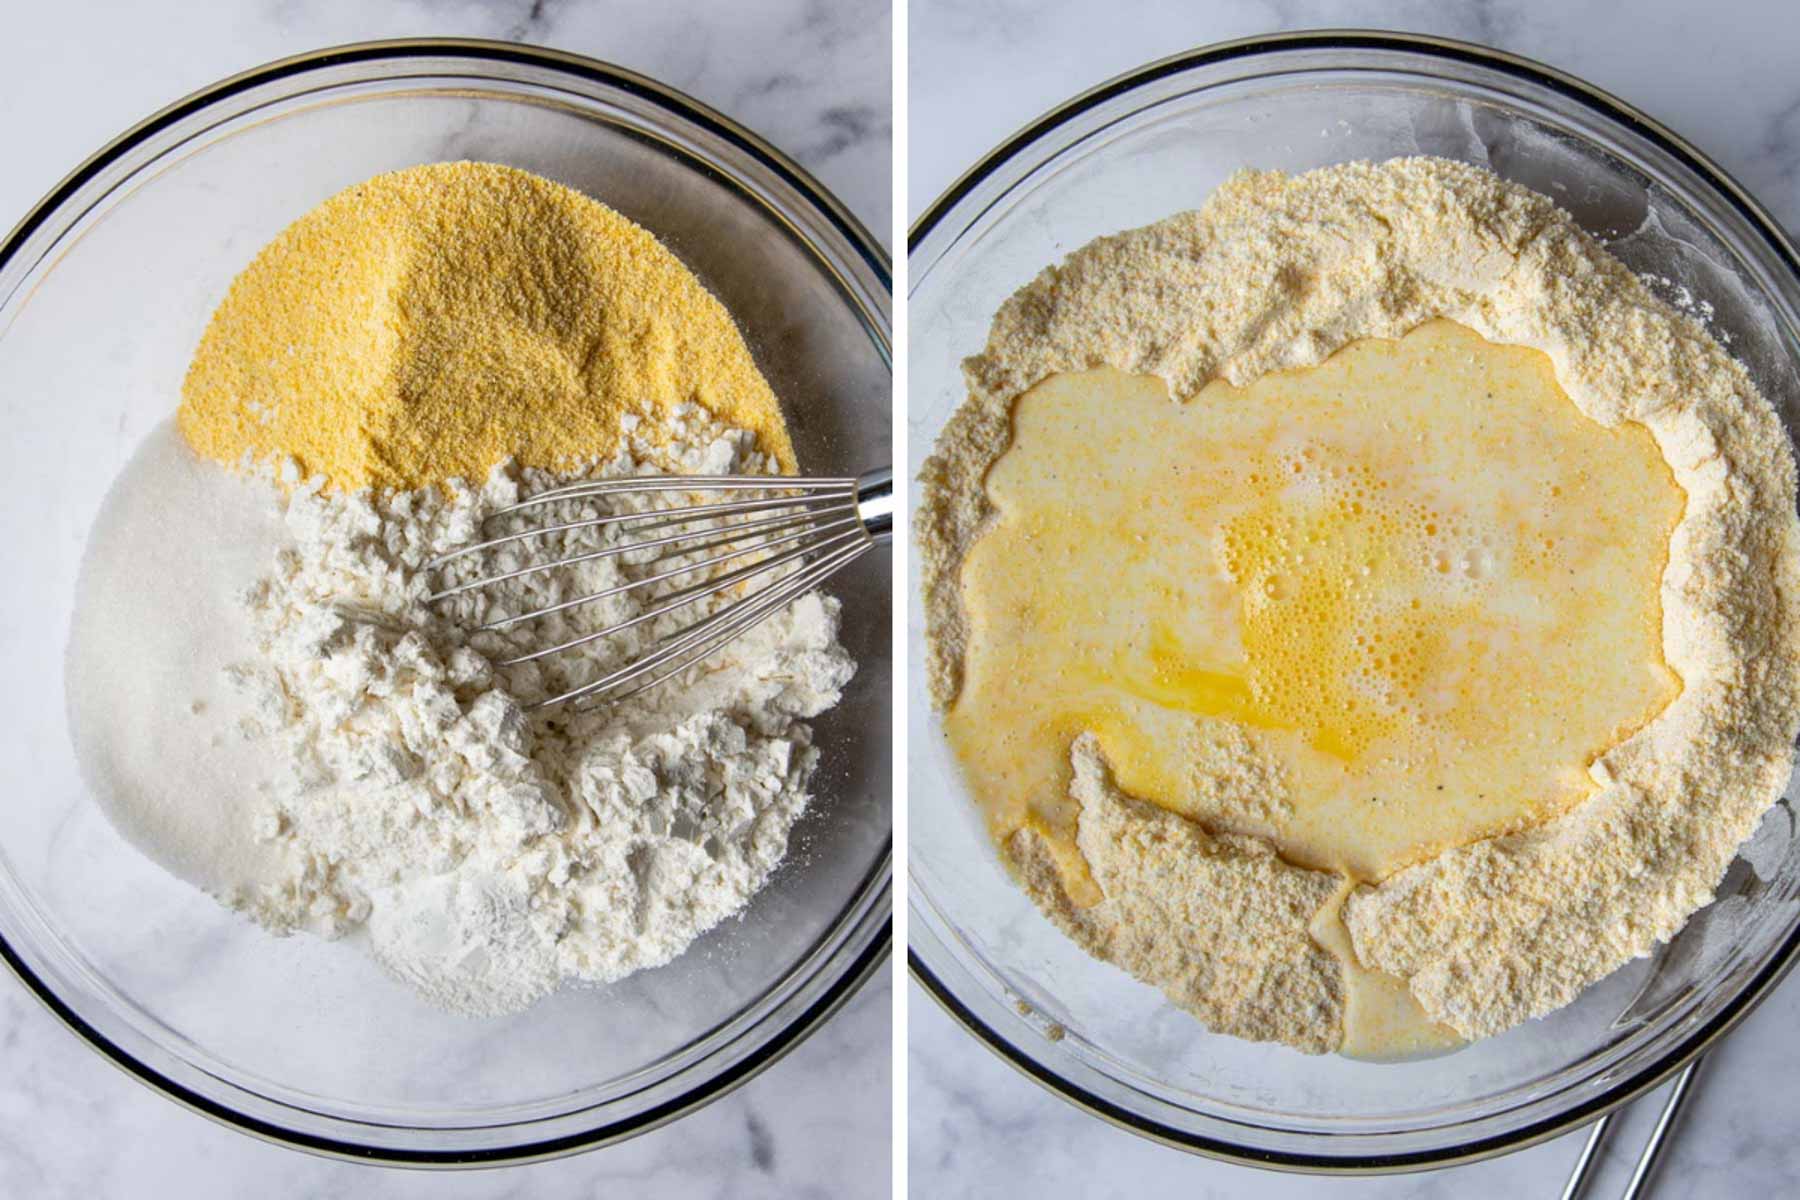 images showing how to make cornbread batter